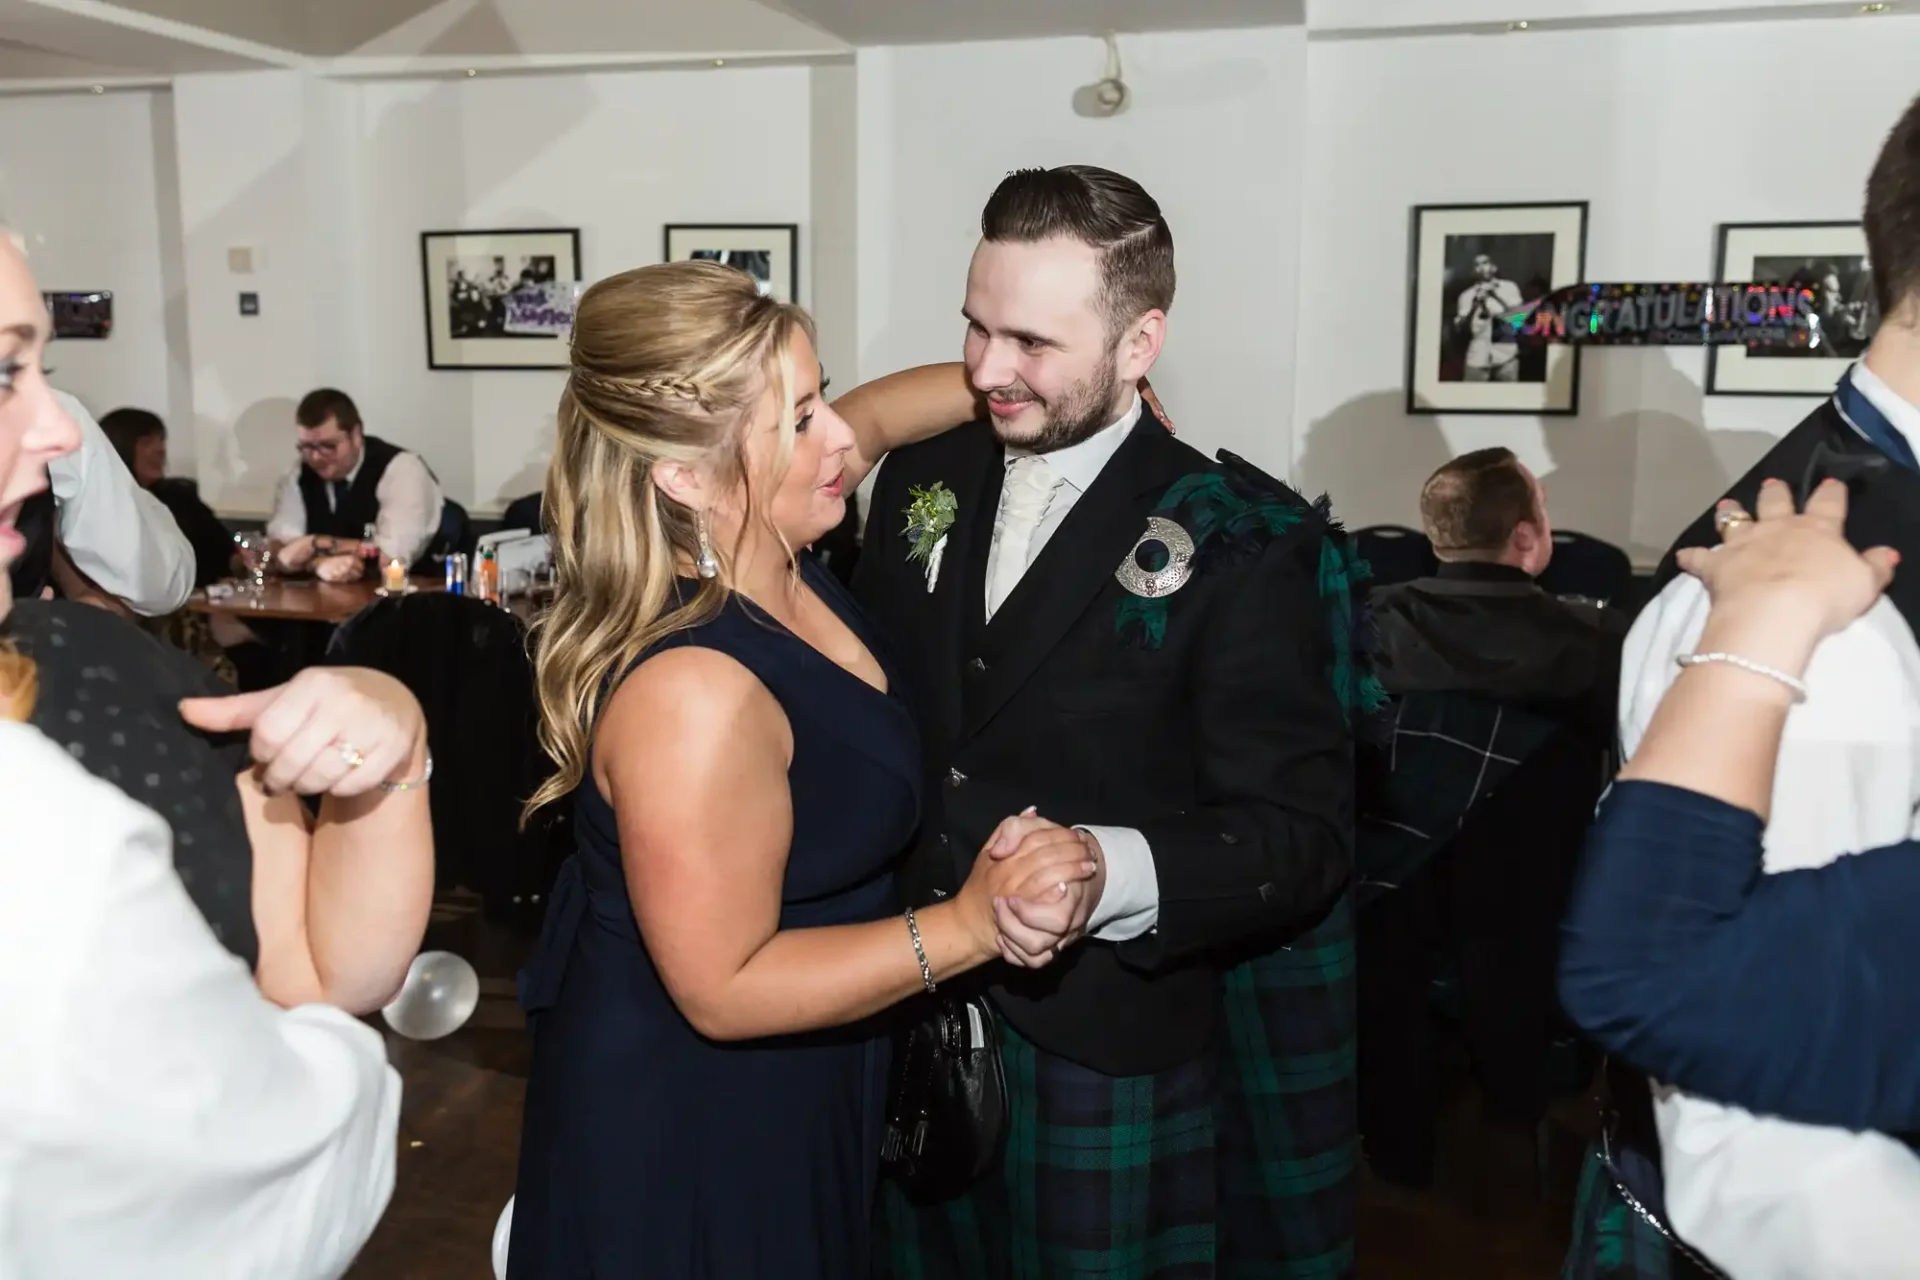 A man in a kilt and a woman with a corsage dancing and smiling at each other at a lively indoor celebration.